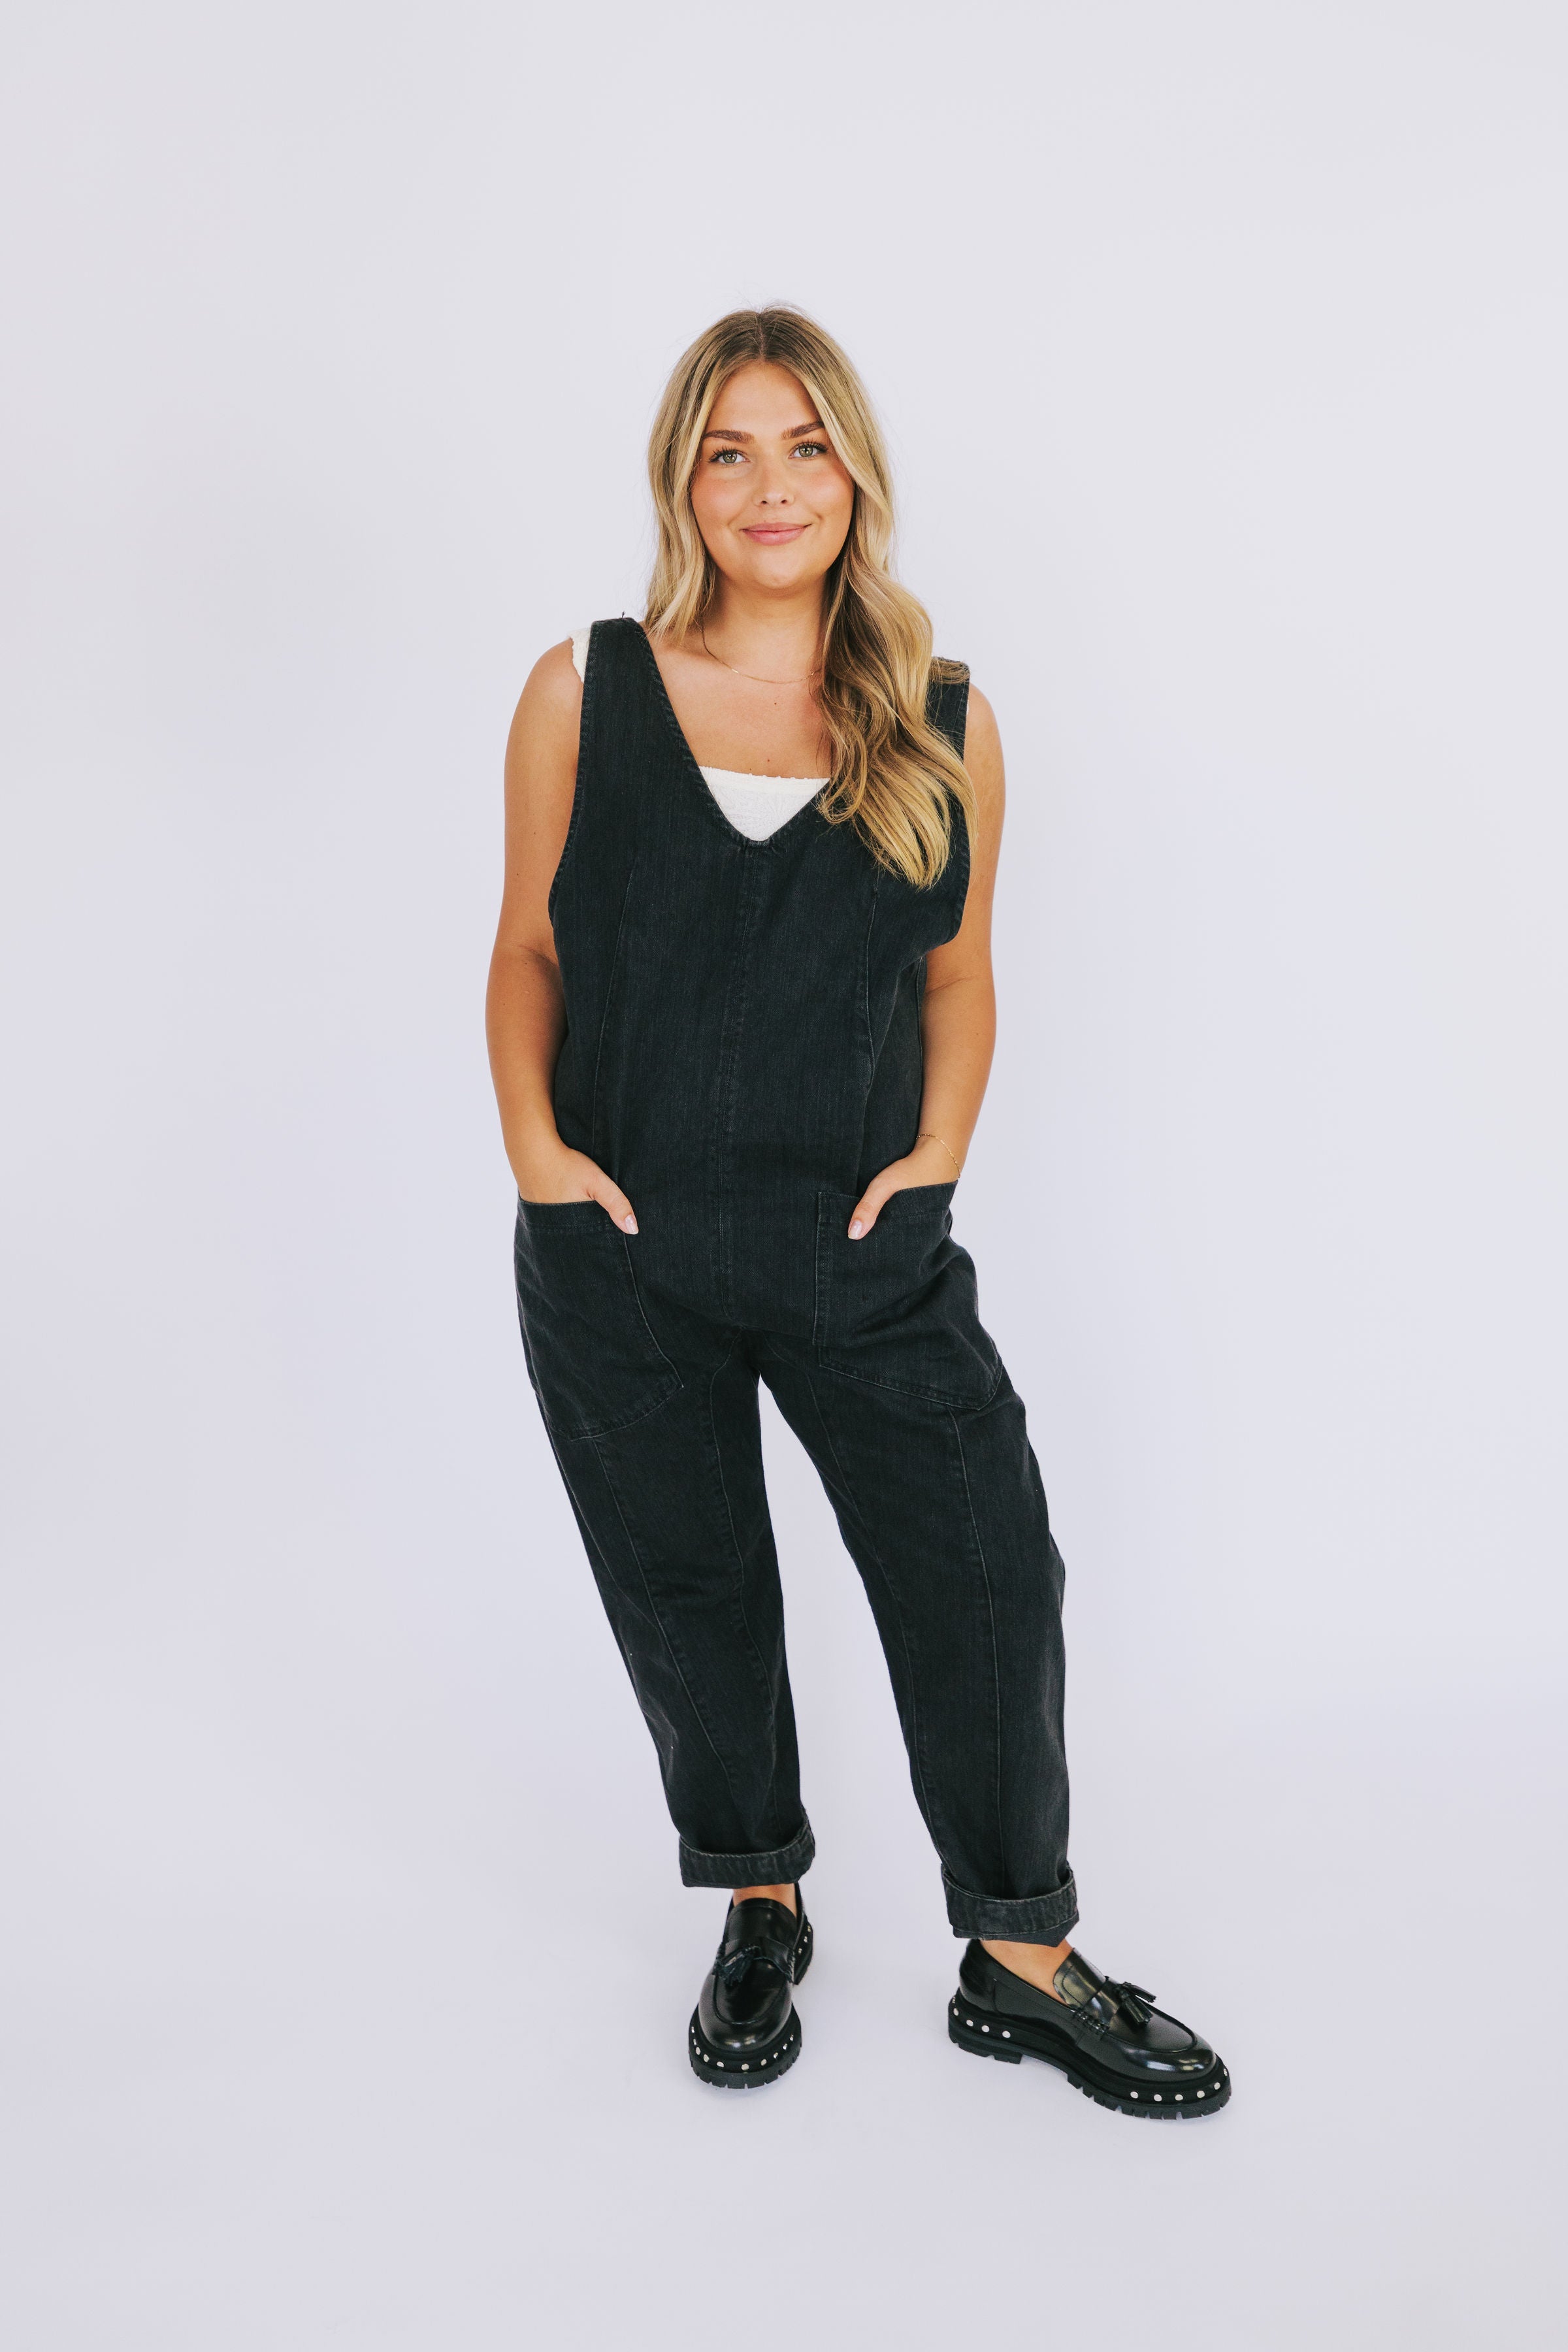 FREE PEOPLE - High Roller Jumpsuit - 3 Colors!